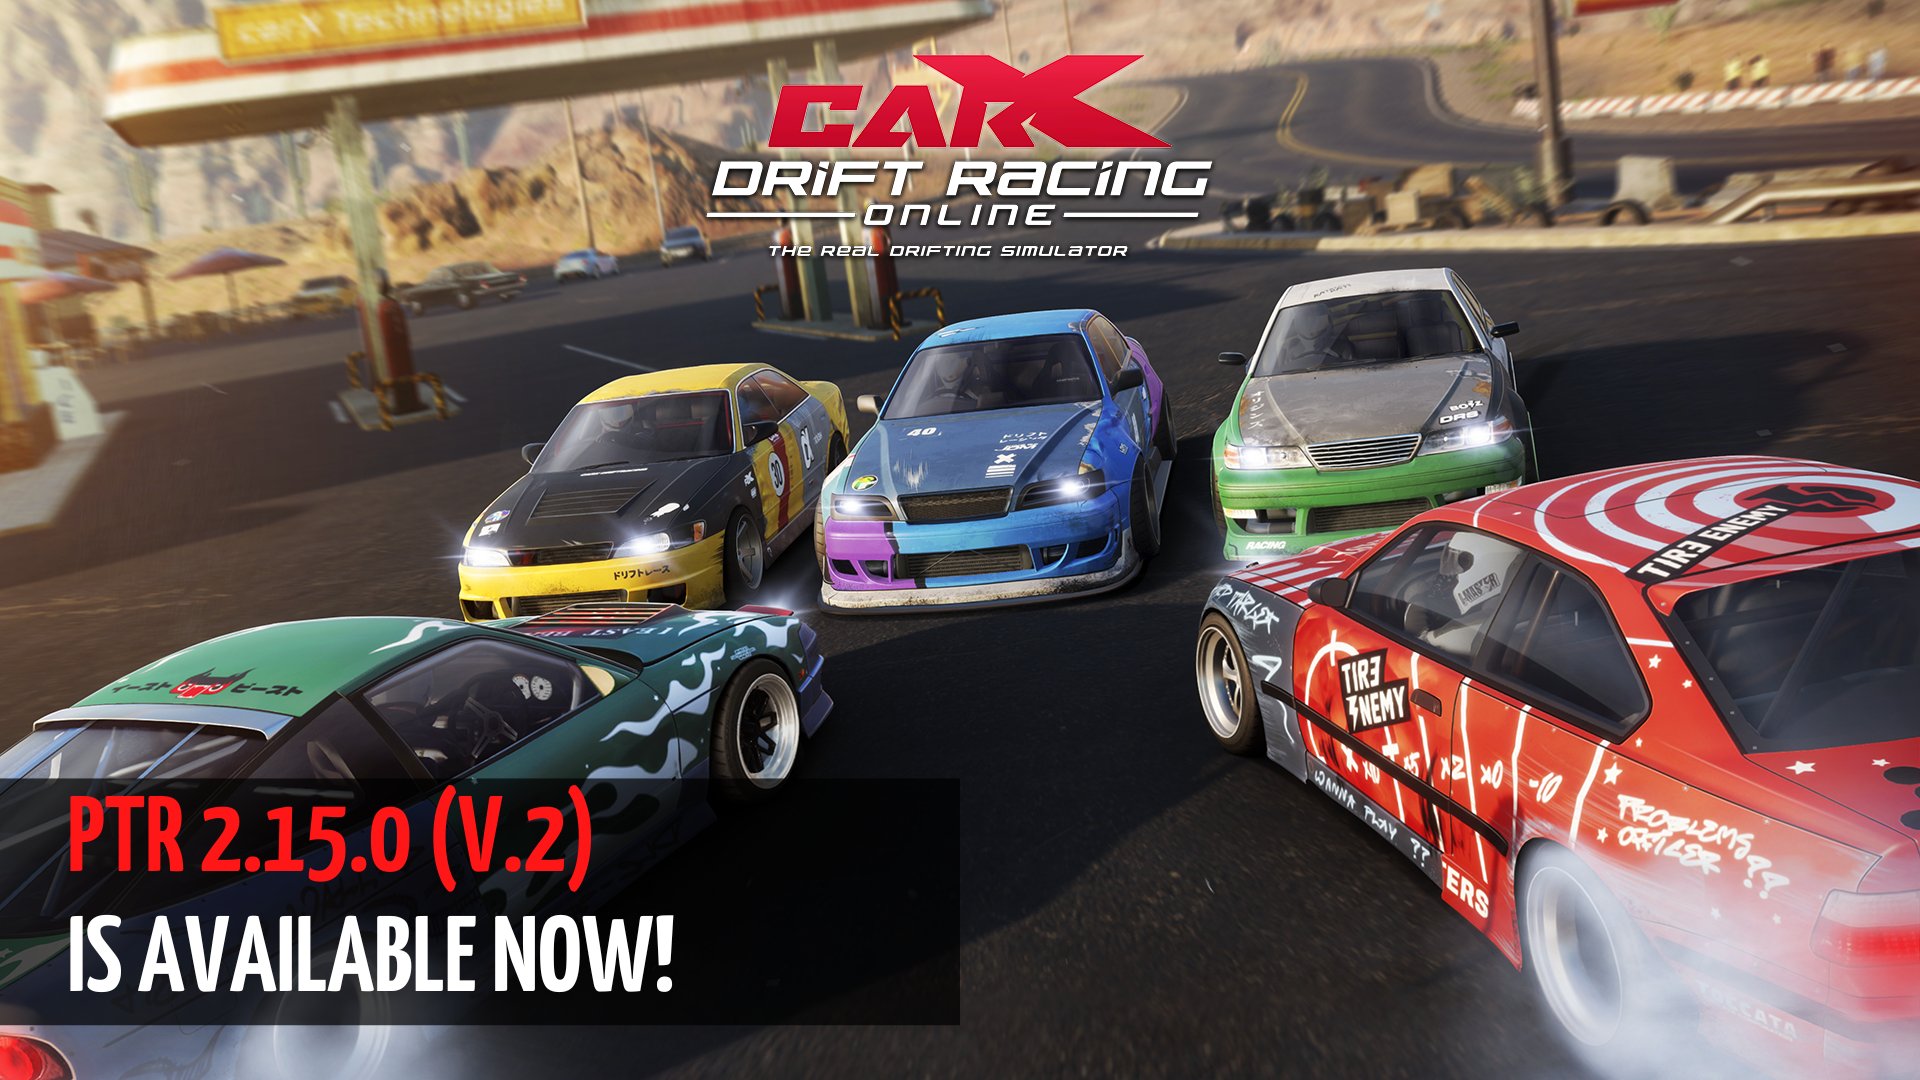 CarX Technologies - What's up drivers!🔥 🔥CarX Drift Racing Online 2.14.2  update is available for Nintendo Switch!🔥 ✓ What's new we've got for this  update: - Added the ability to turn on/off